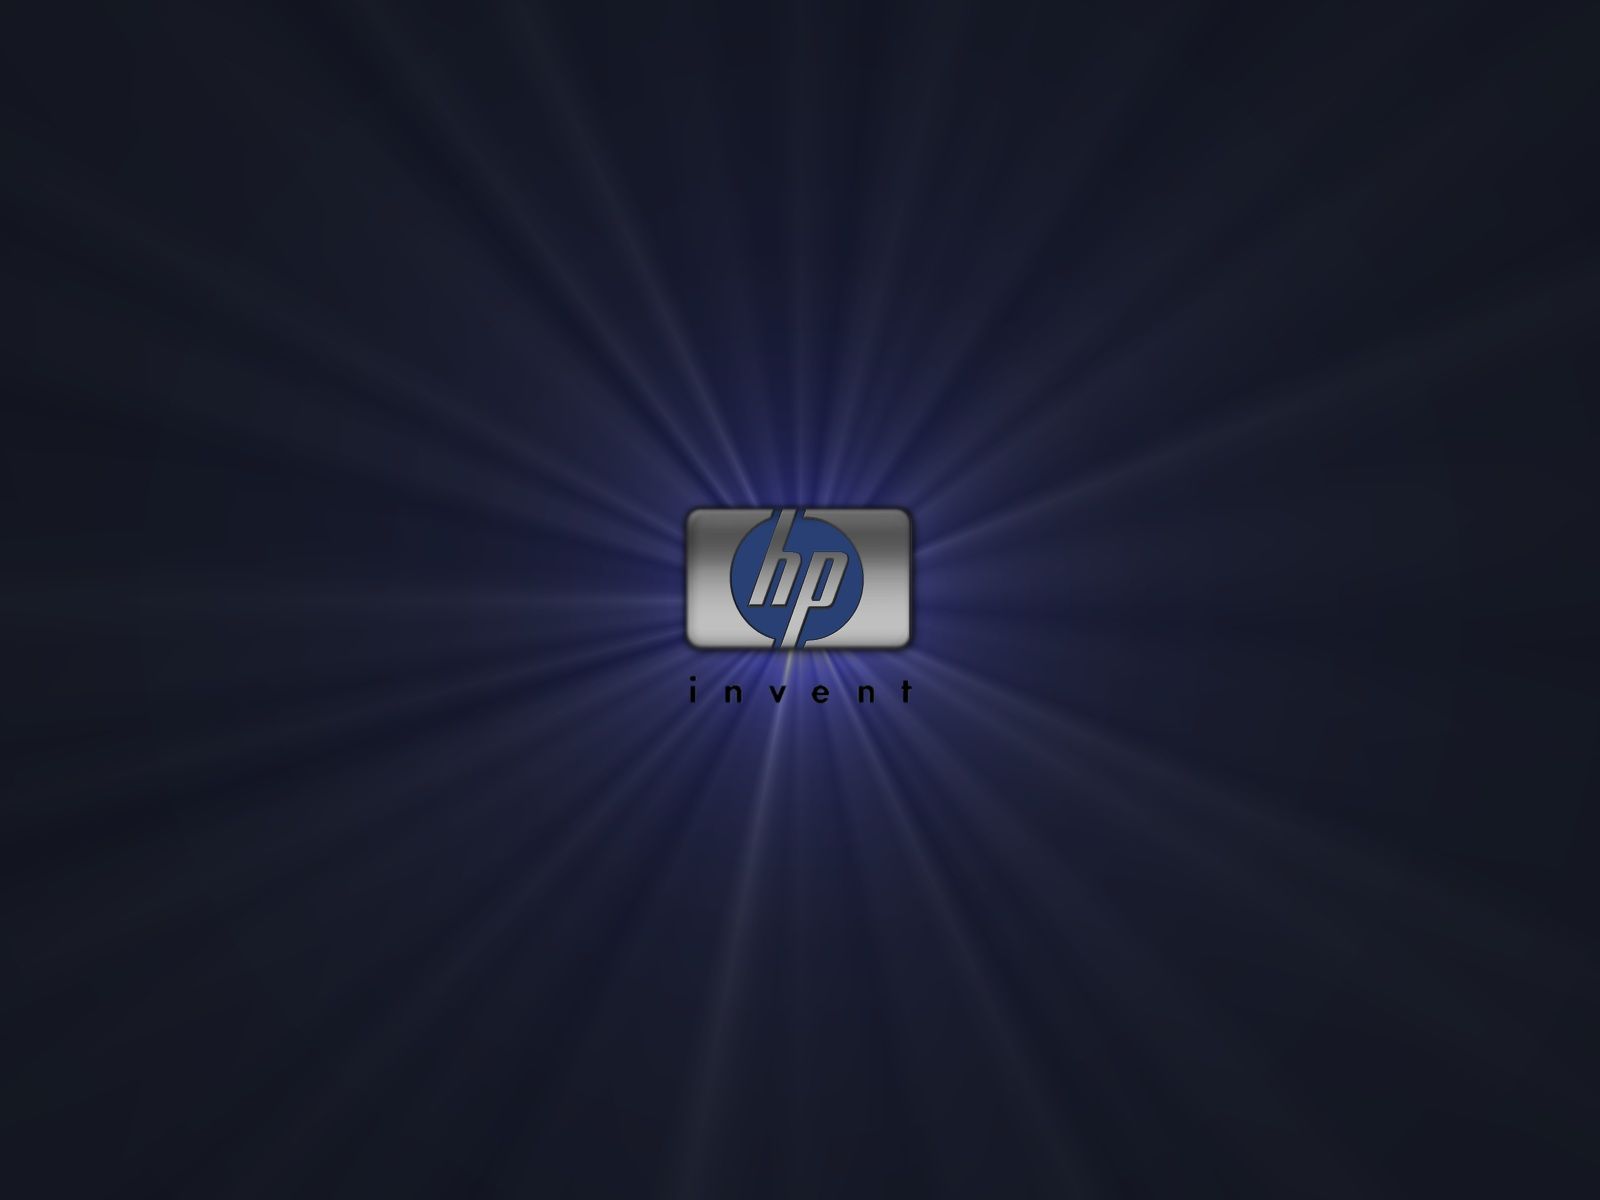  HP 3D Wallpapers Group 79 